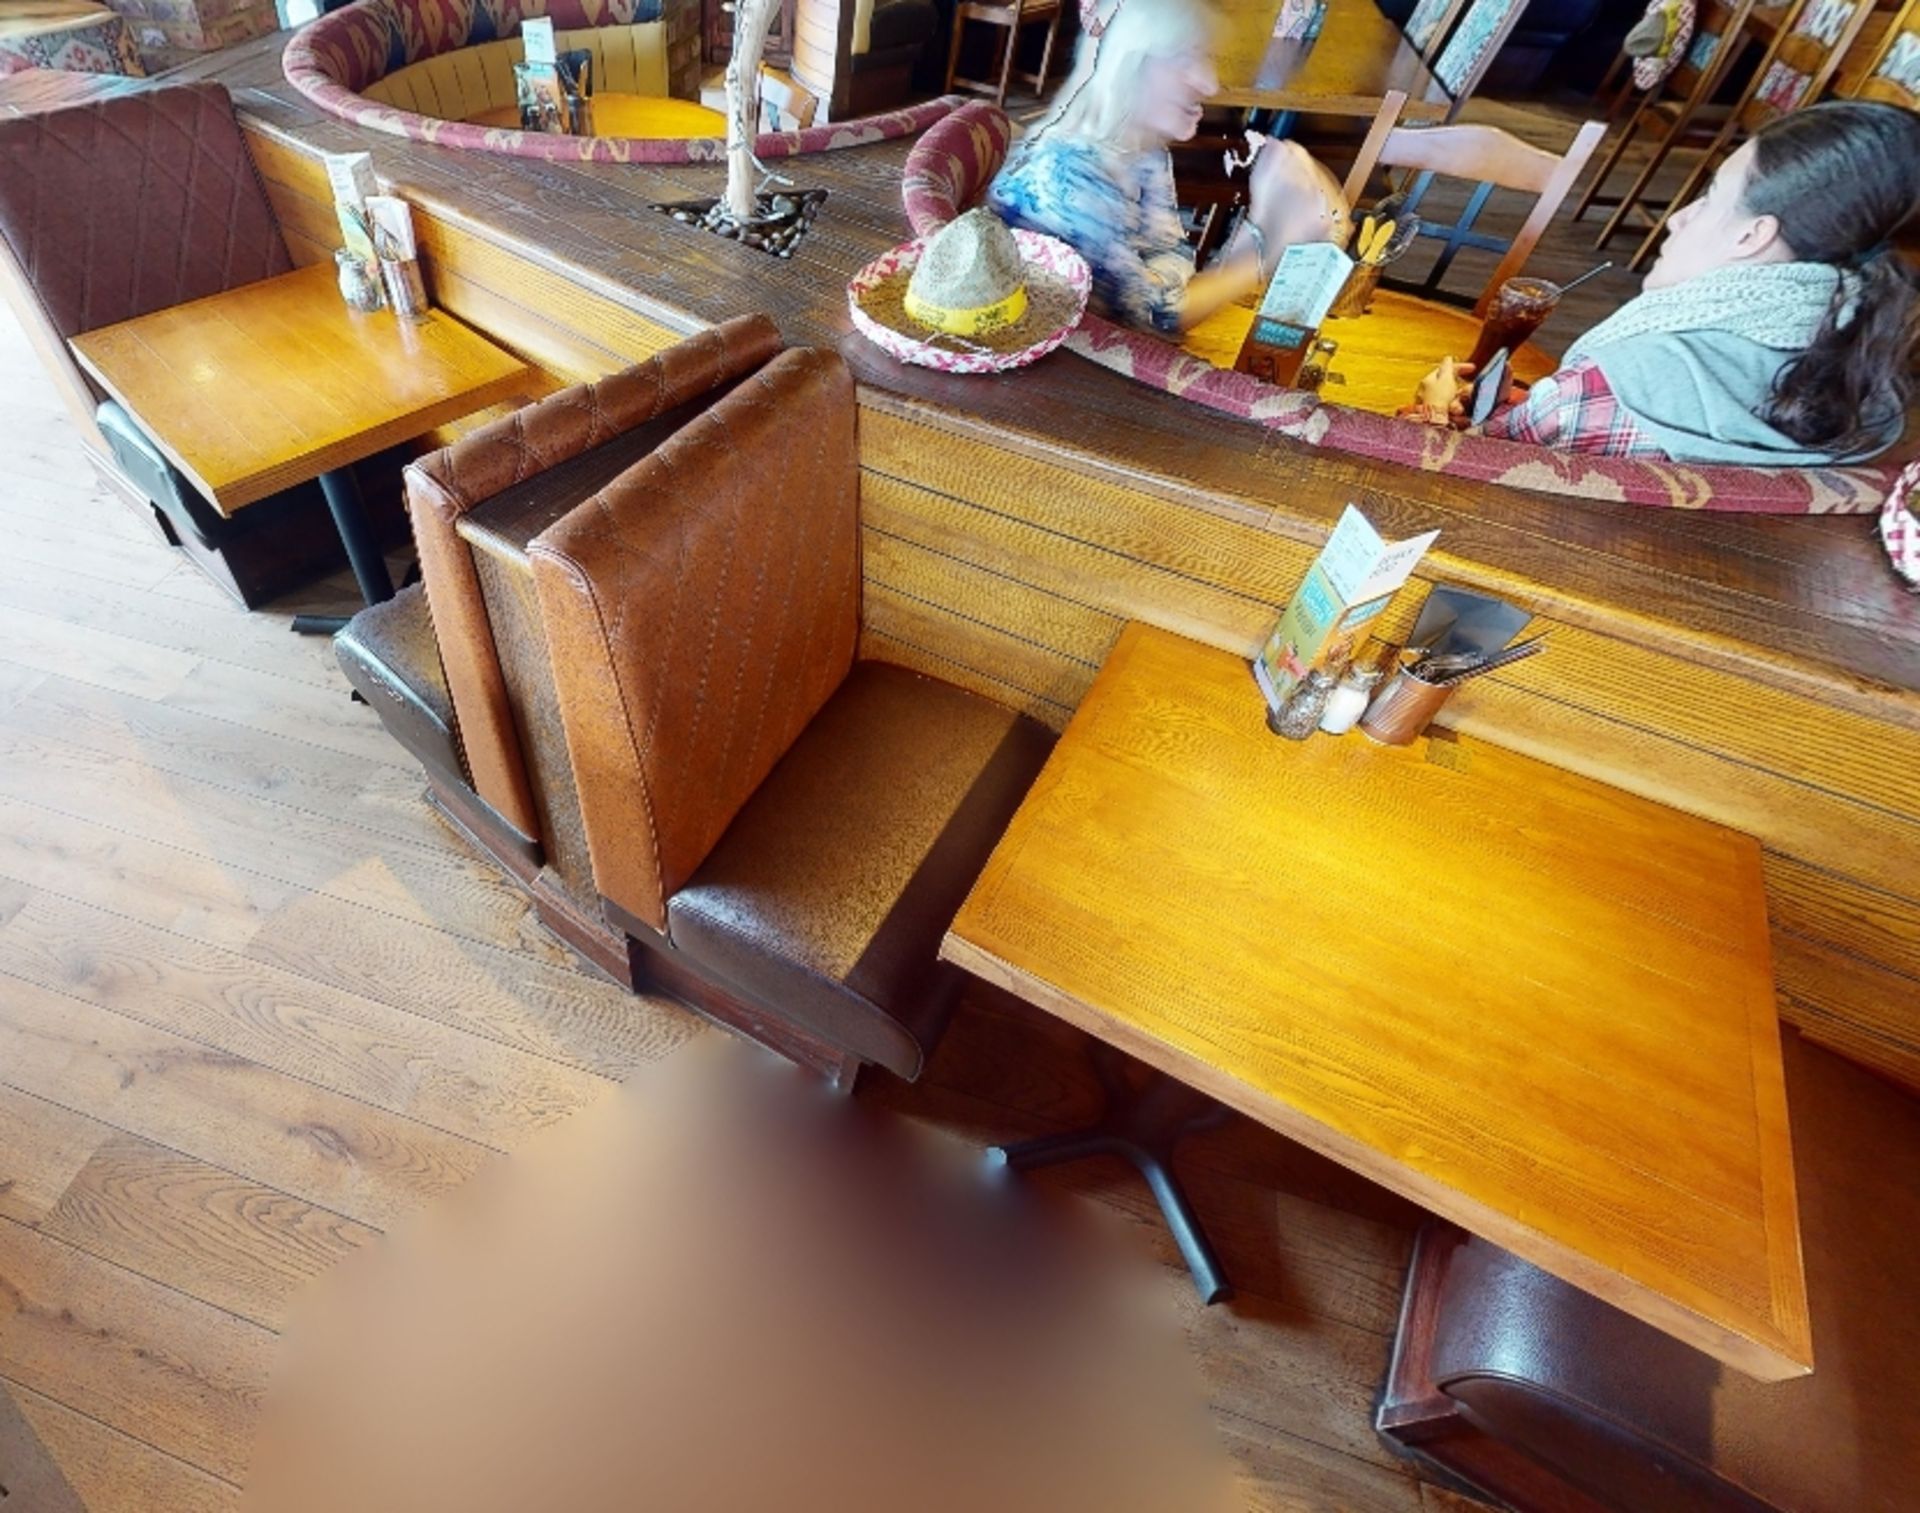 2 x Two Seater Restaurant Dining Tables With Cast Iron Bases and Wood Panelled Design Tops With - Image 2 of 6